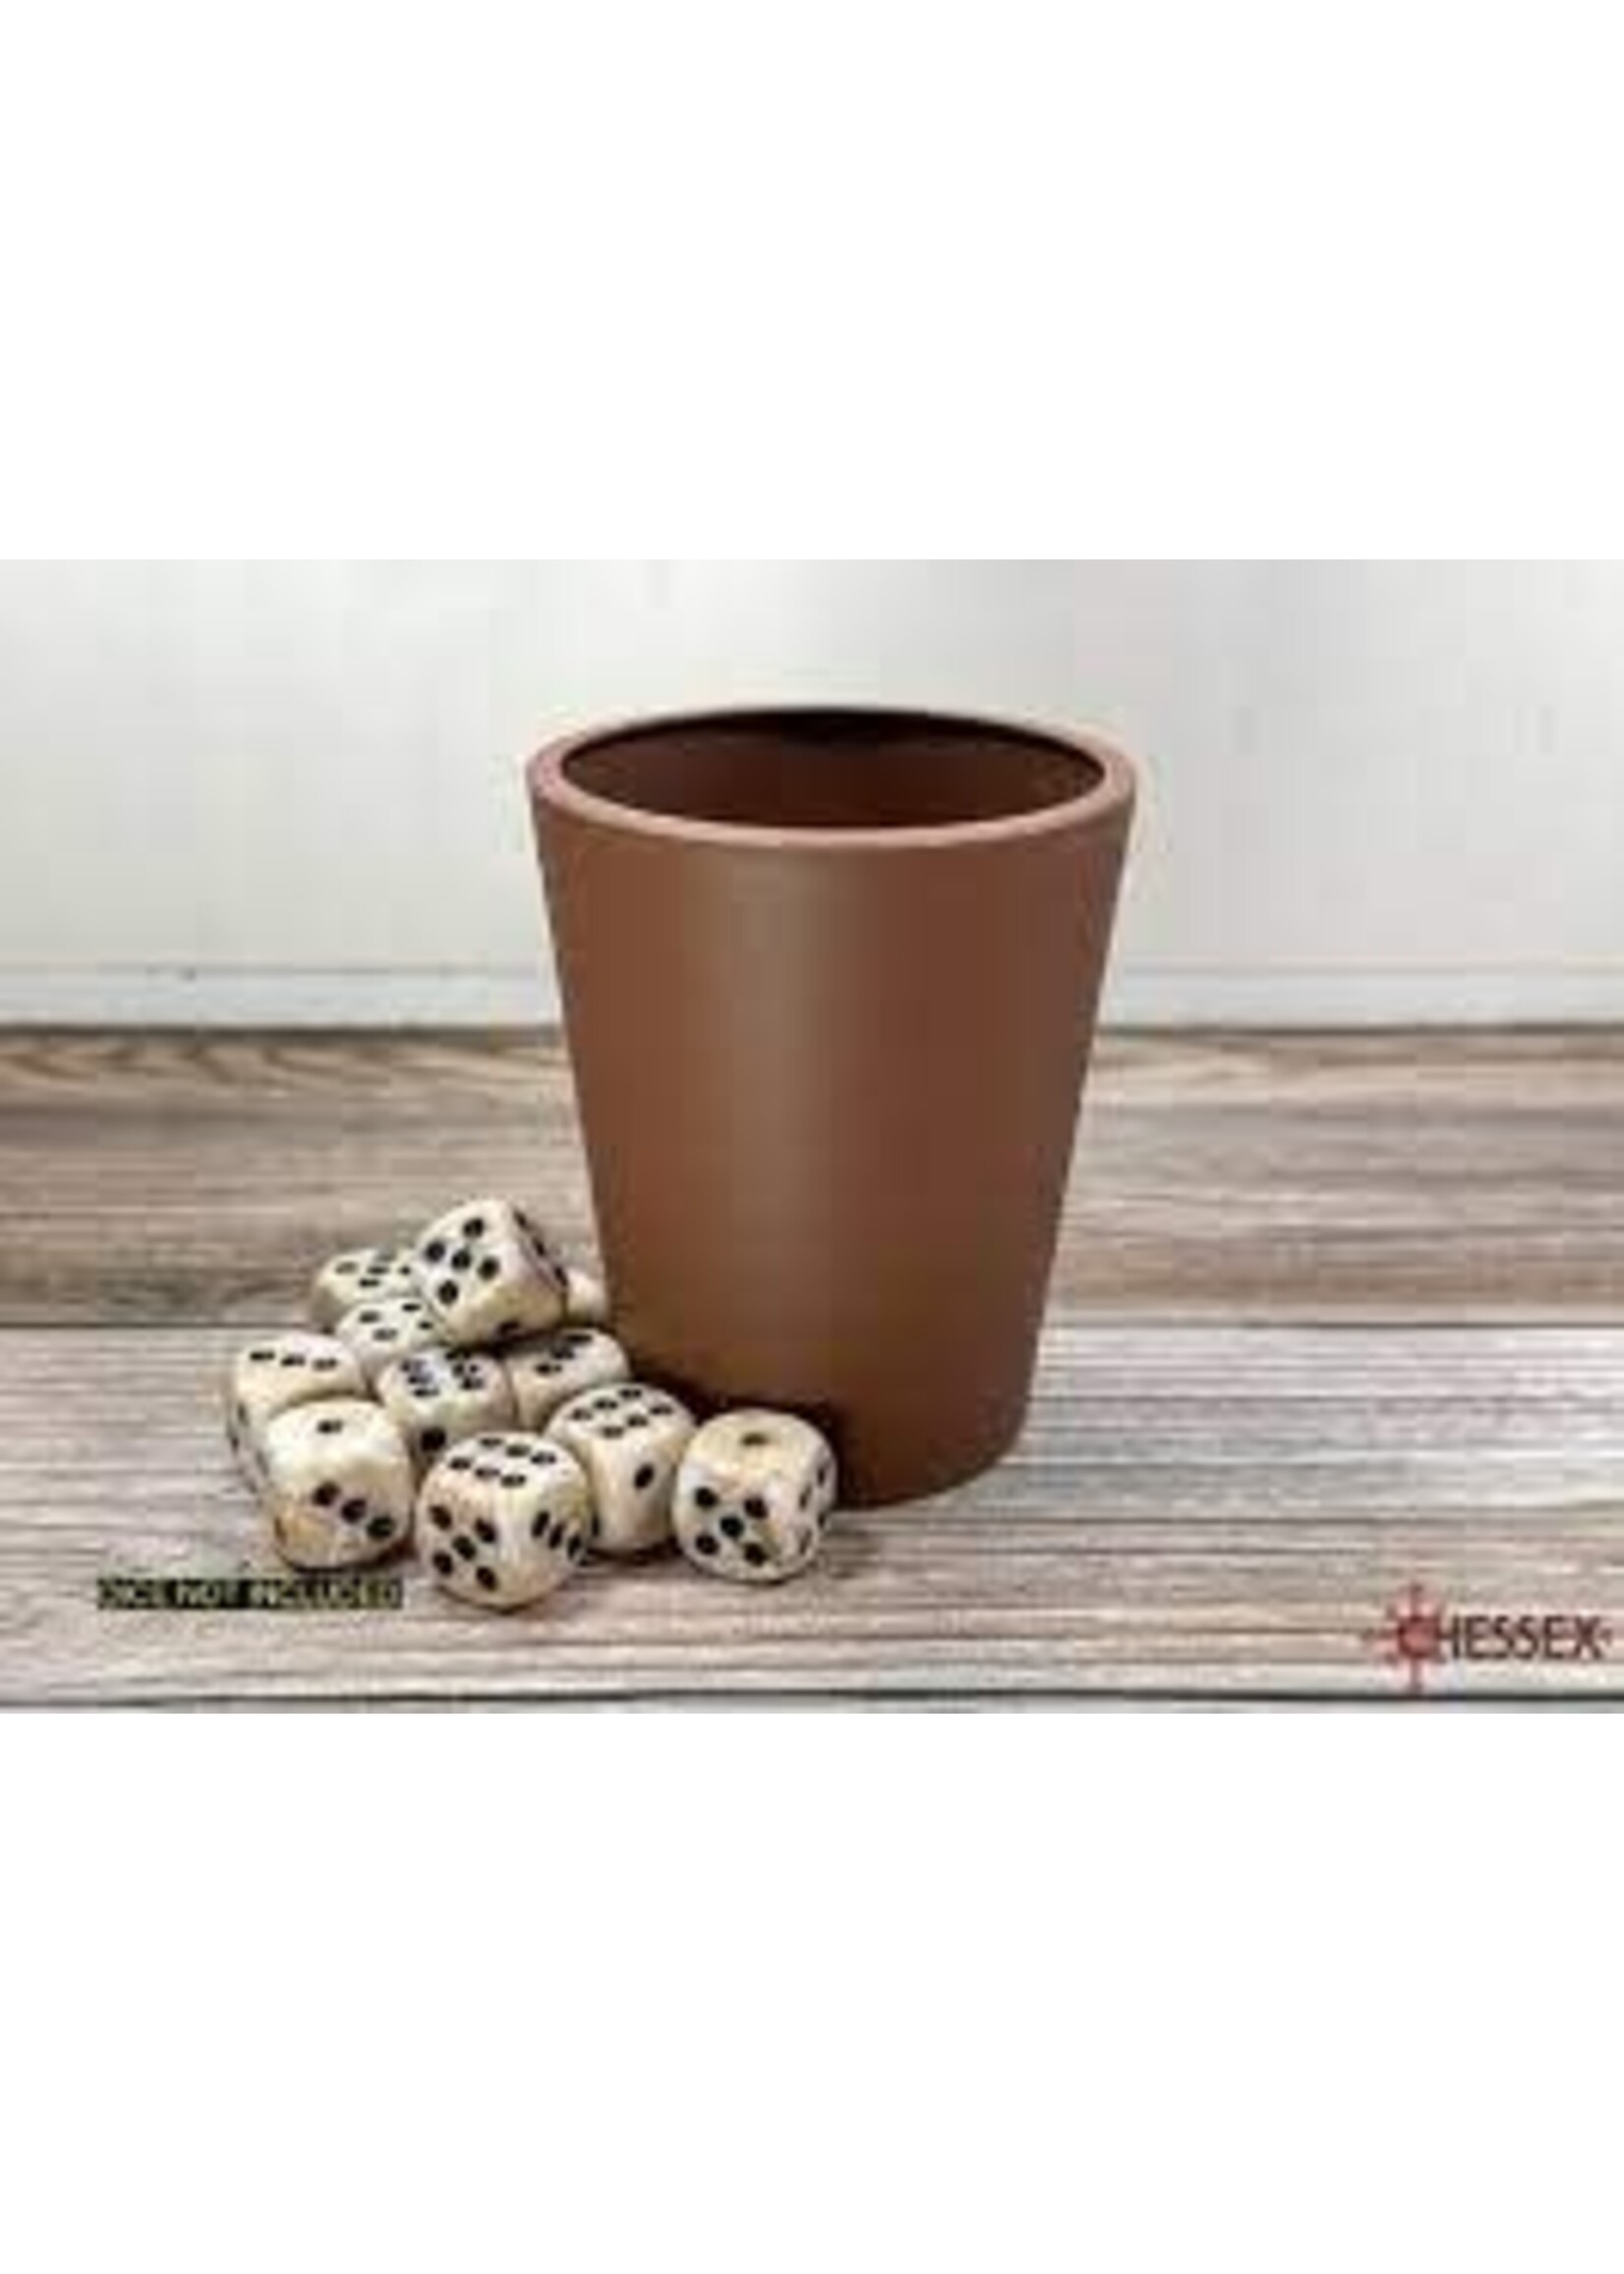 Chessex Flexible Dice Cup - Brown